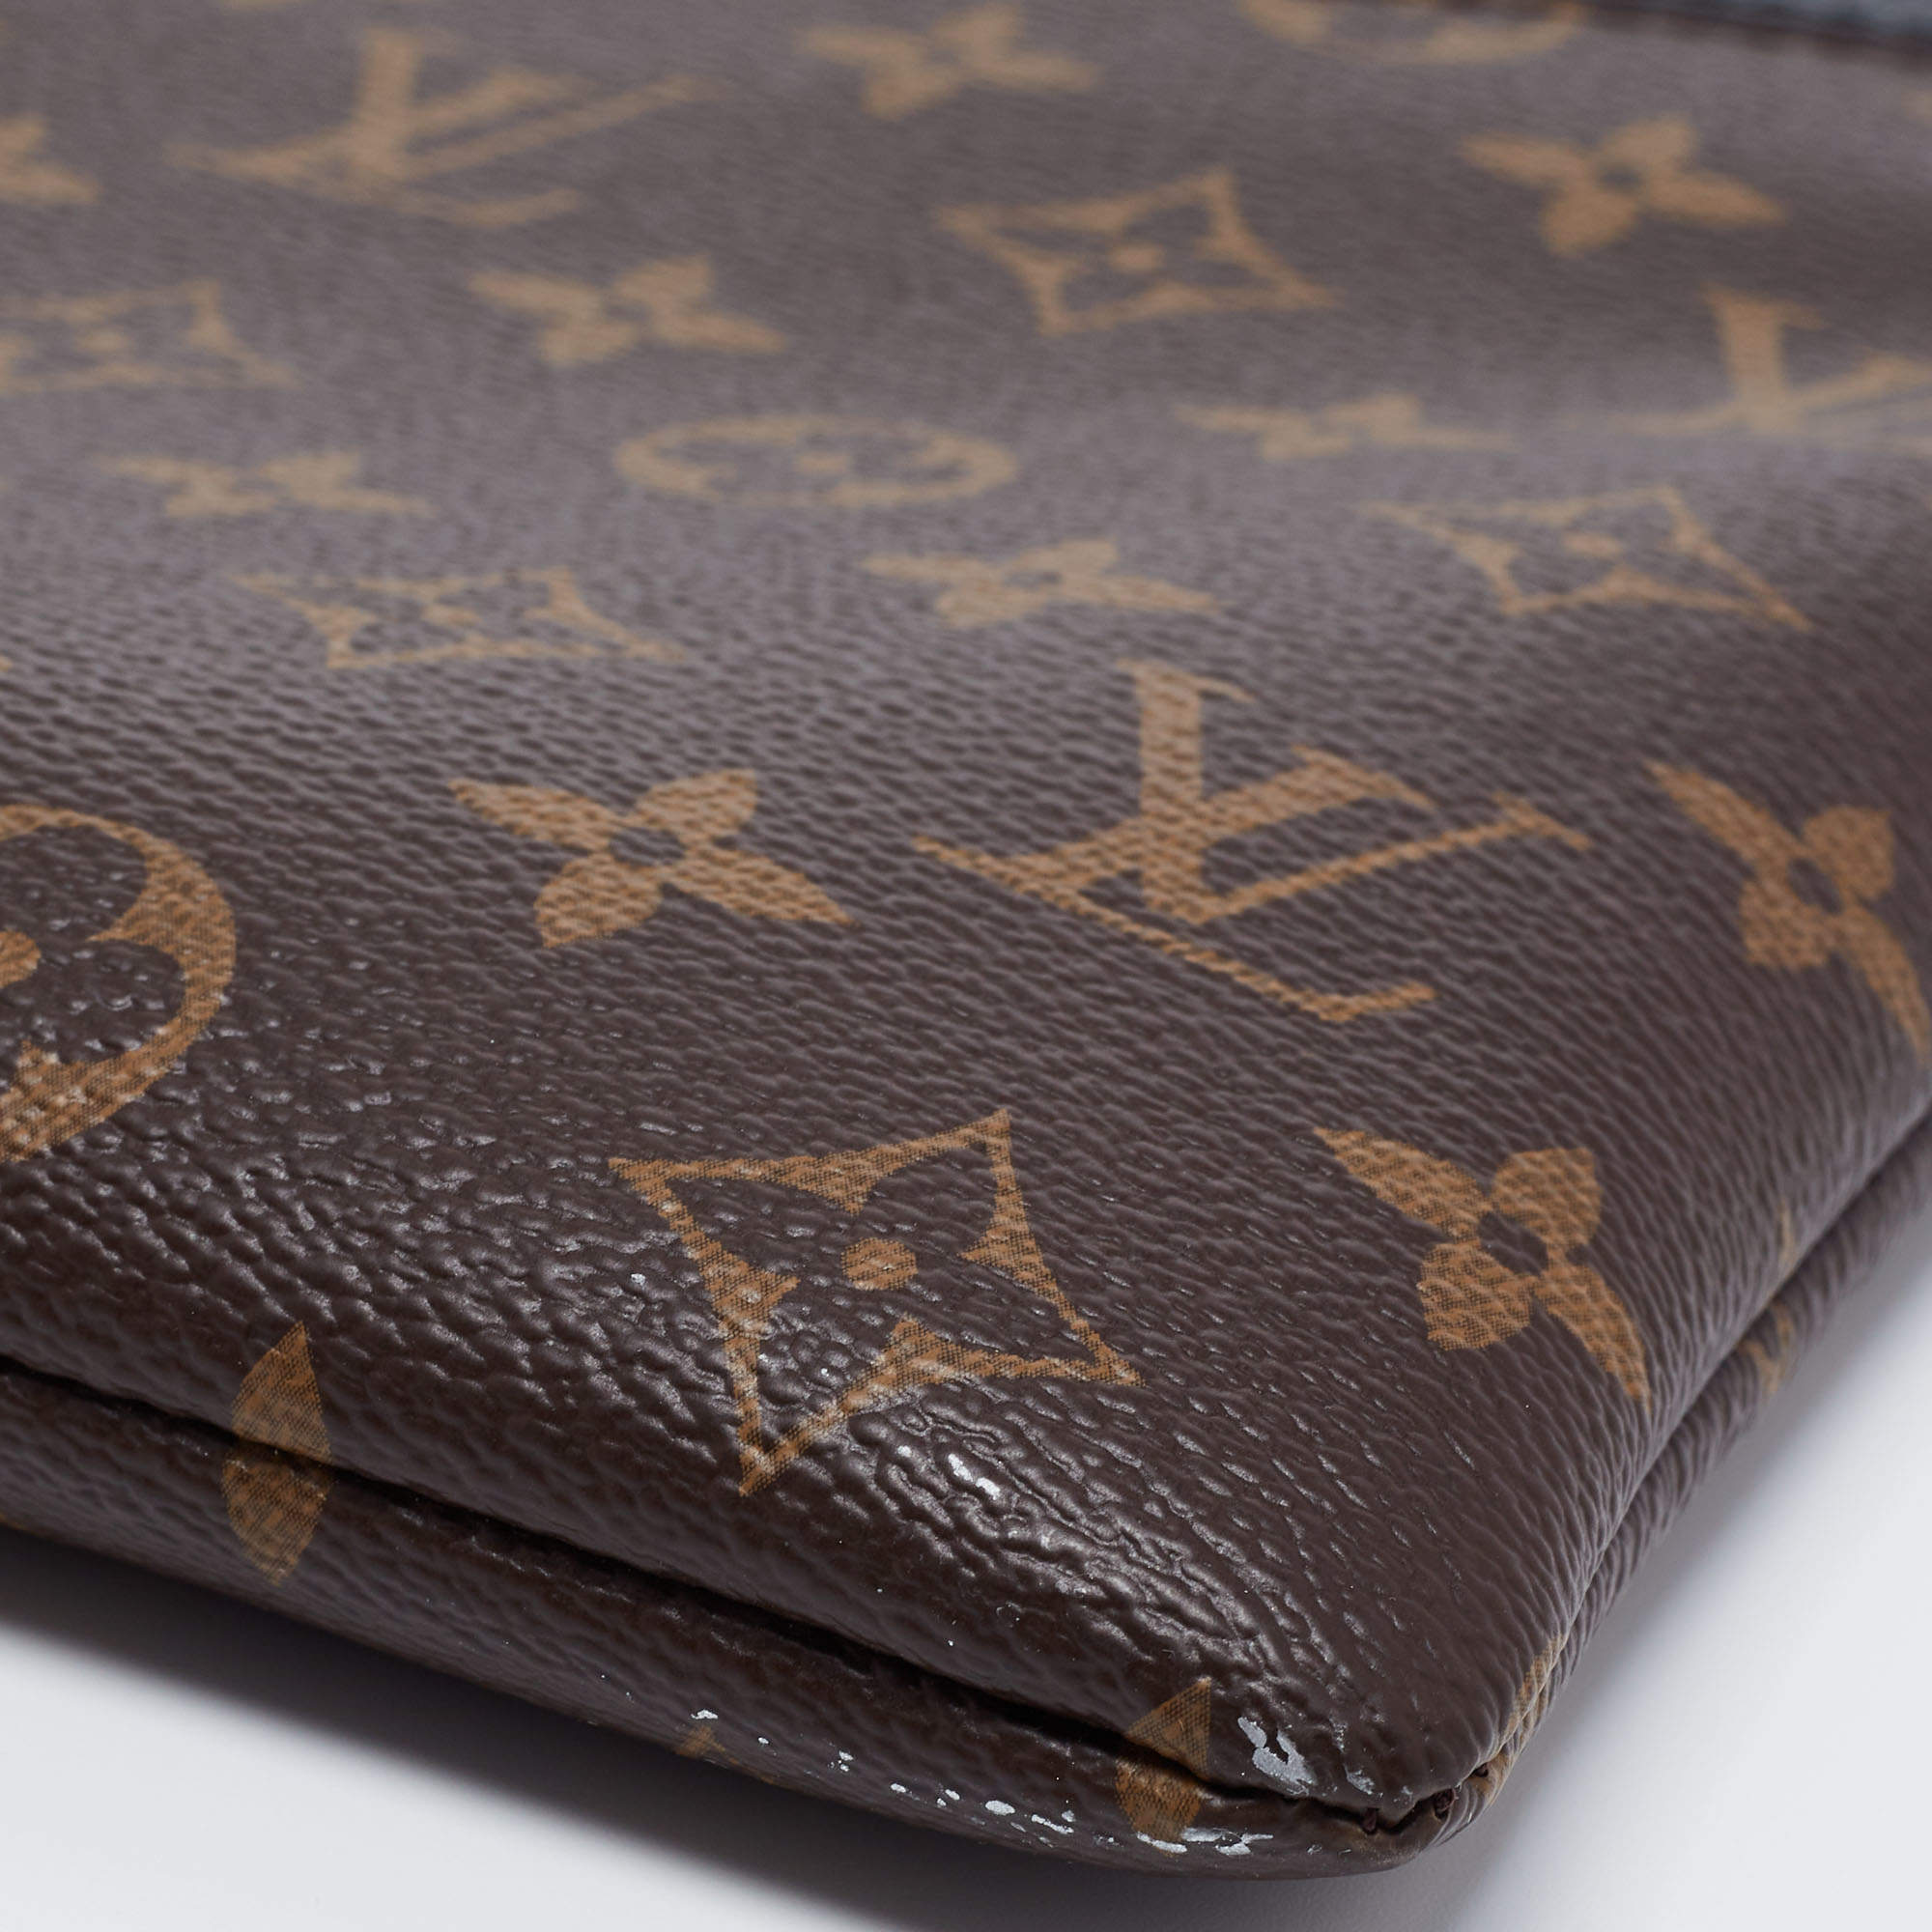 Louis Vuitton pre-owned Monogram Daily Pouch - ShopStyle Clutches